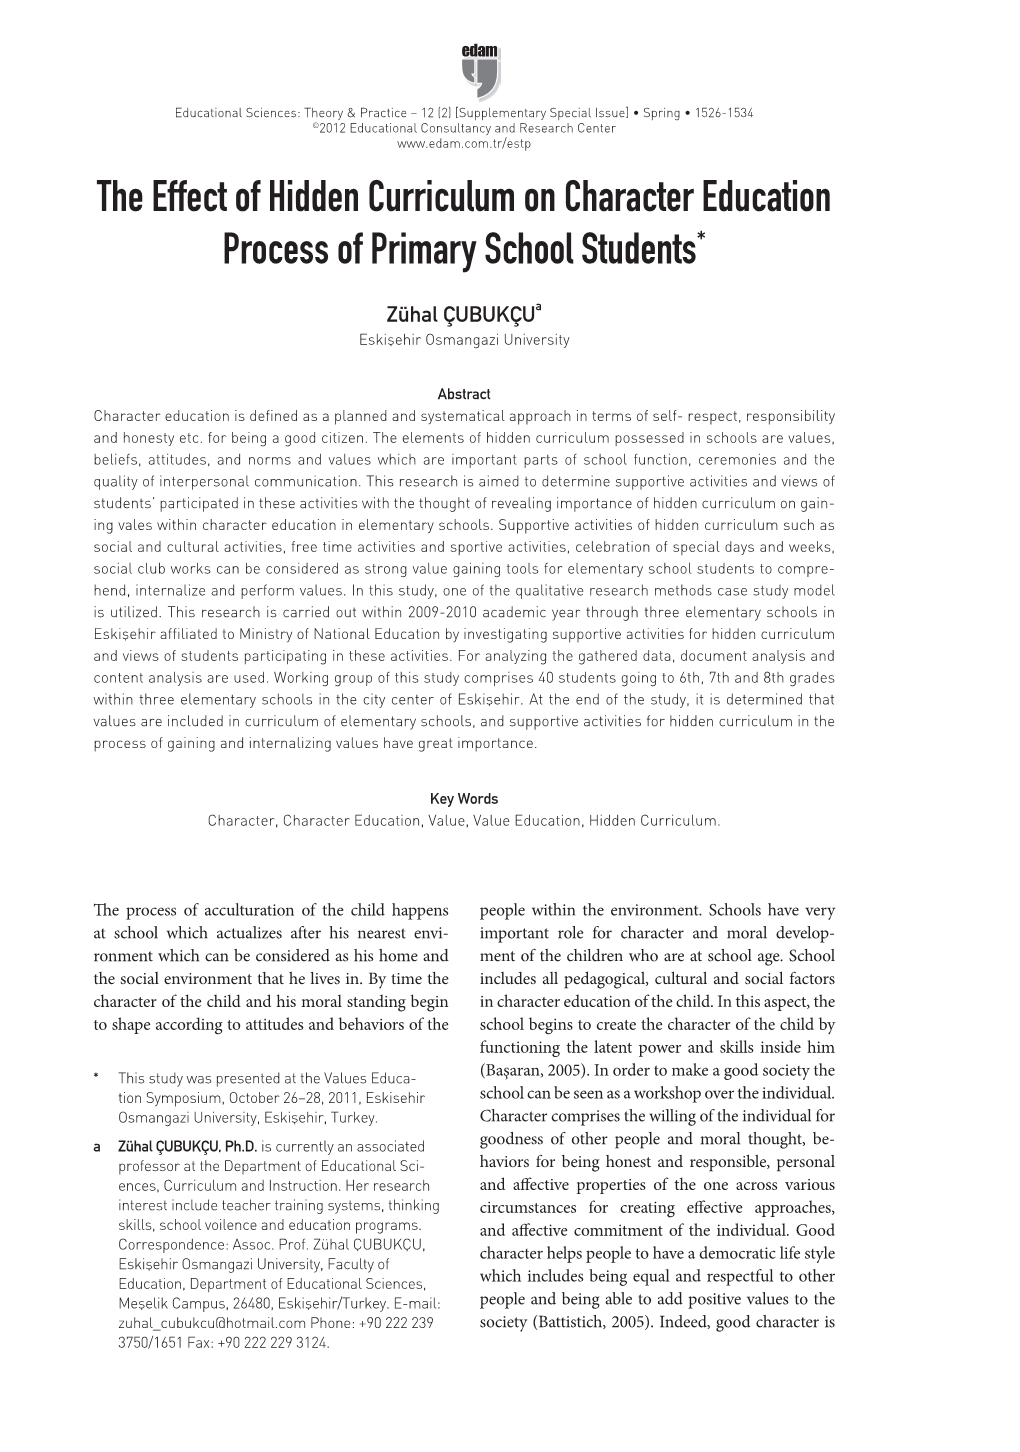 The Effect of Hidden Curriculum on Character Education Process of Primary School Students*